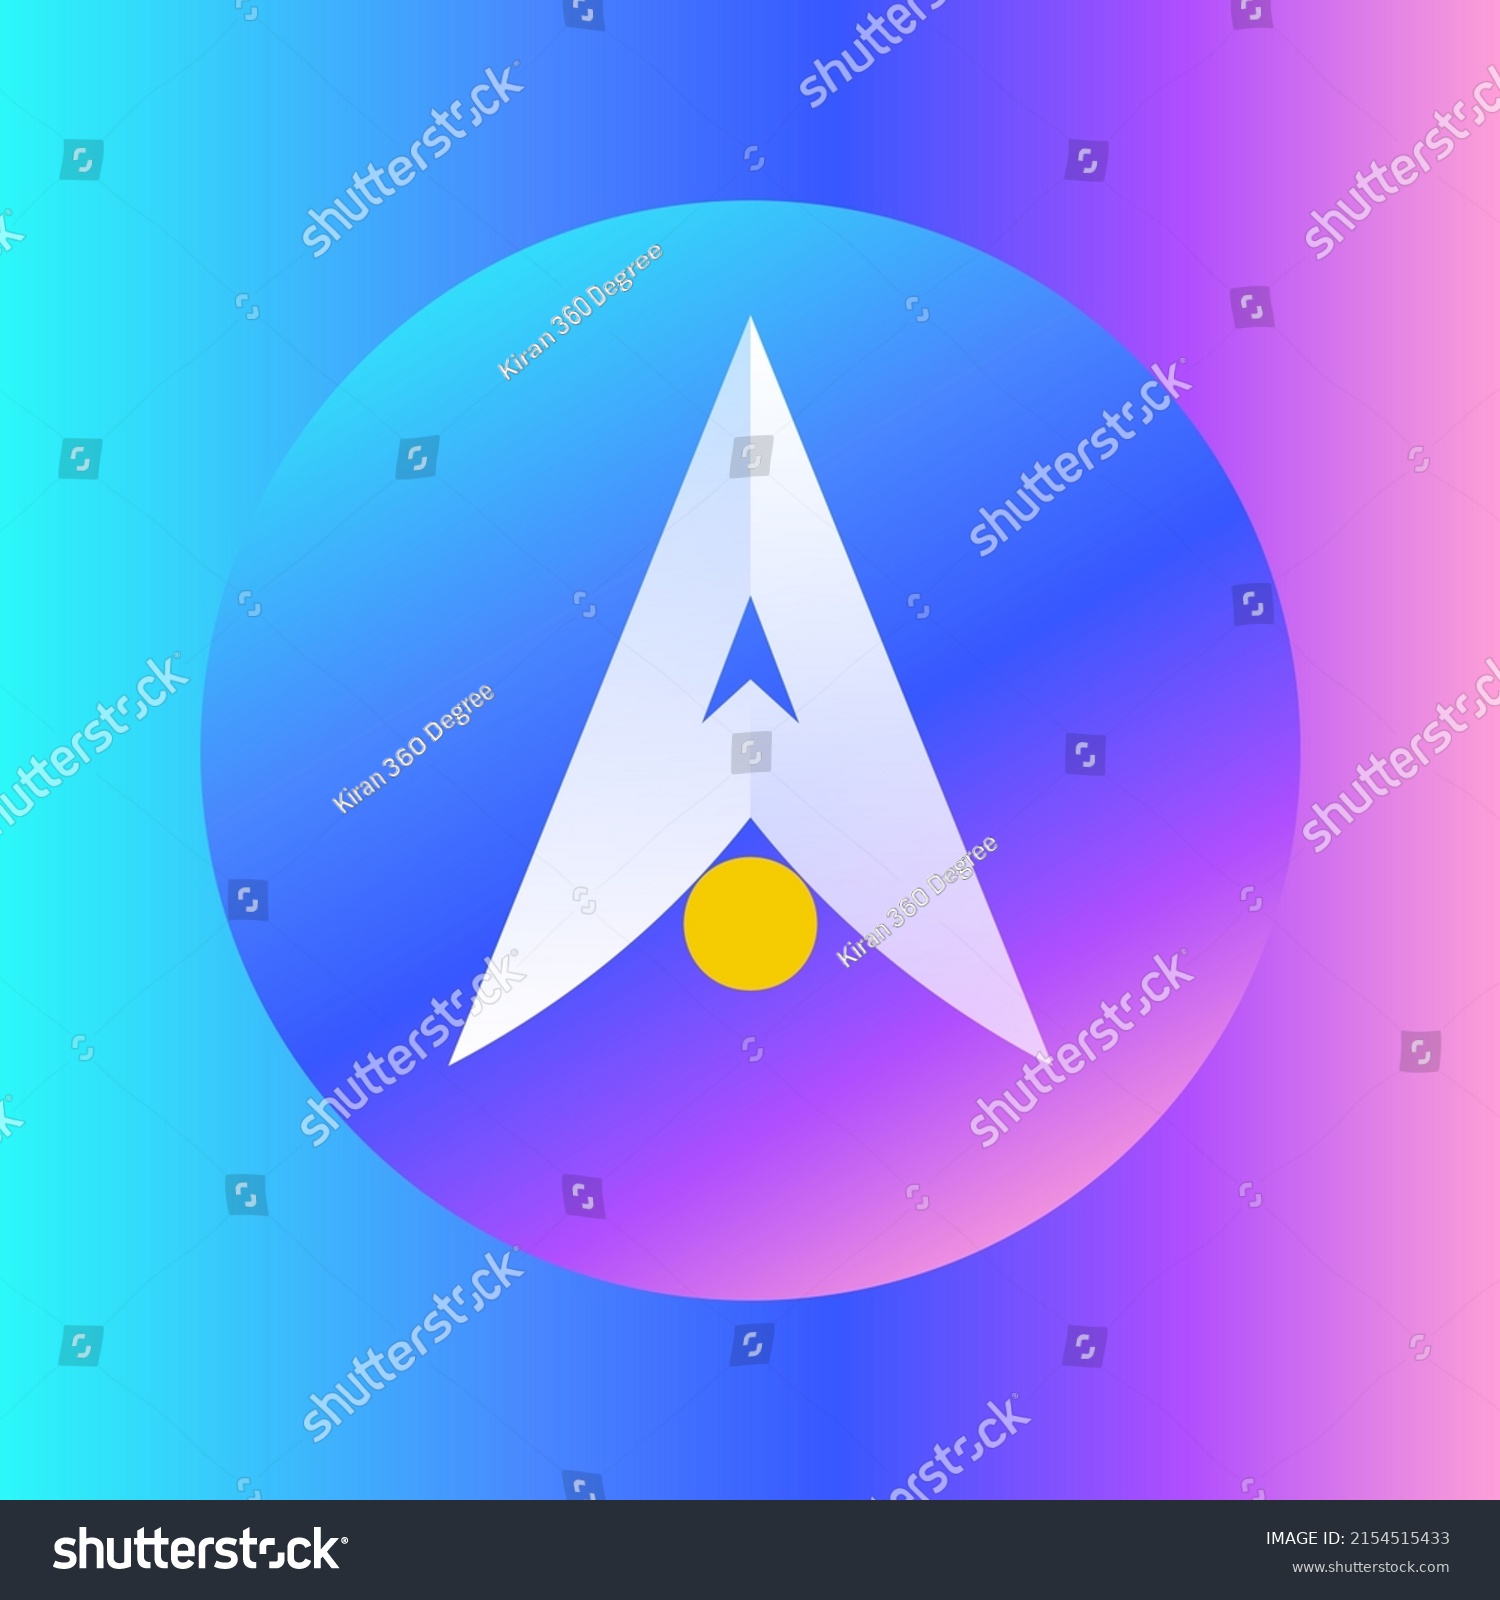 SVG of Alpha Finance Lab (ALPHA) Crypto coin logo and symbol on a gradient background. Creative virtual currency symbol vector illustration svg